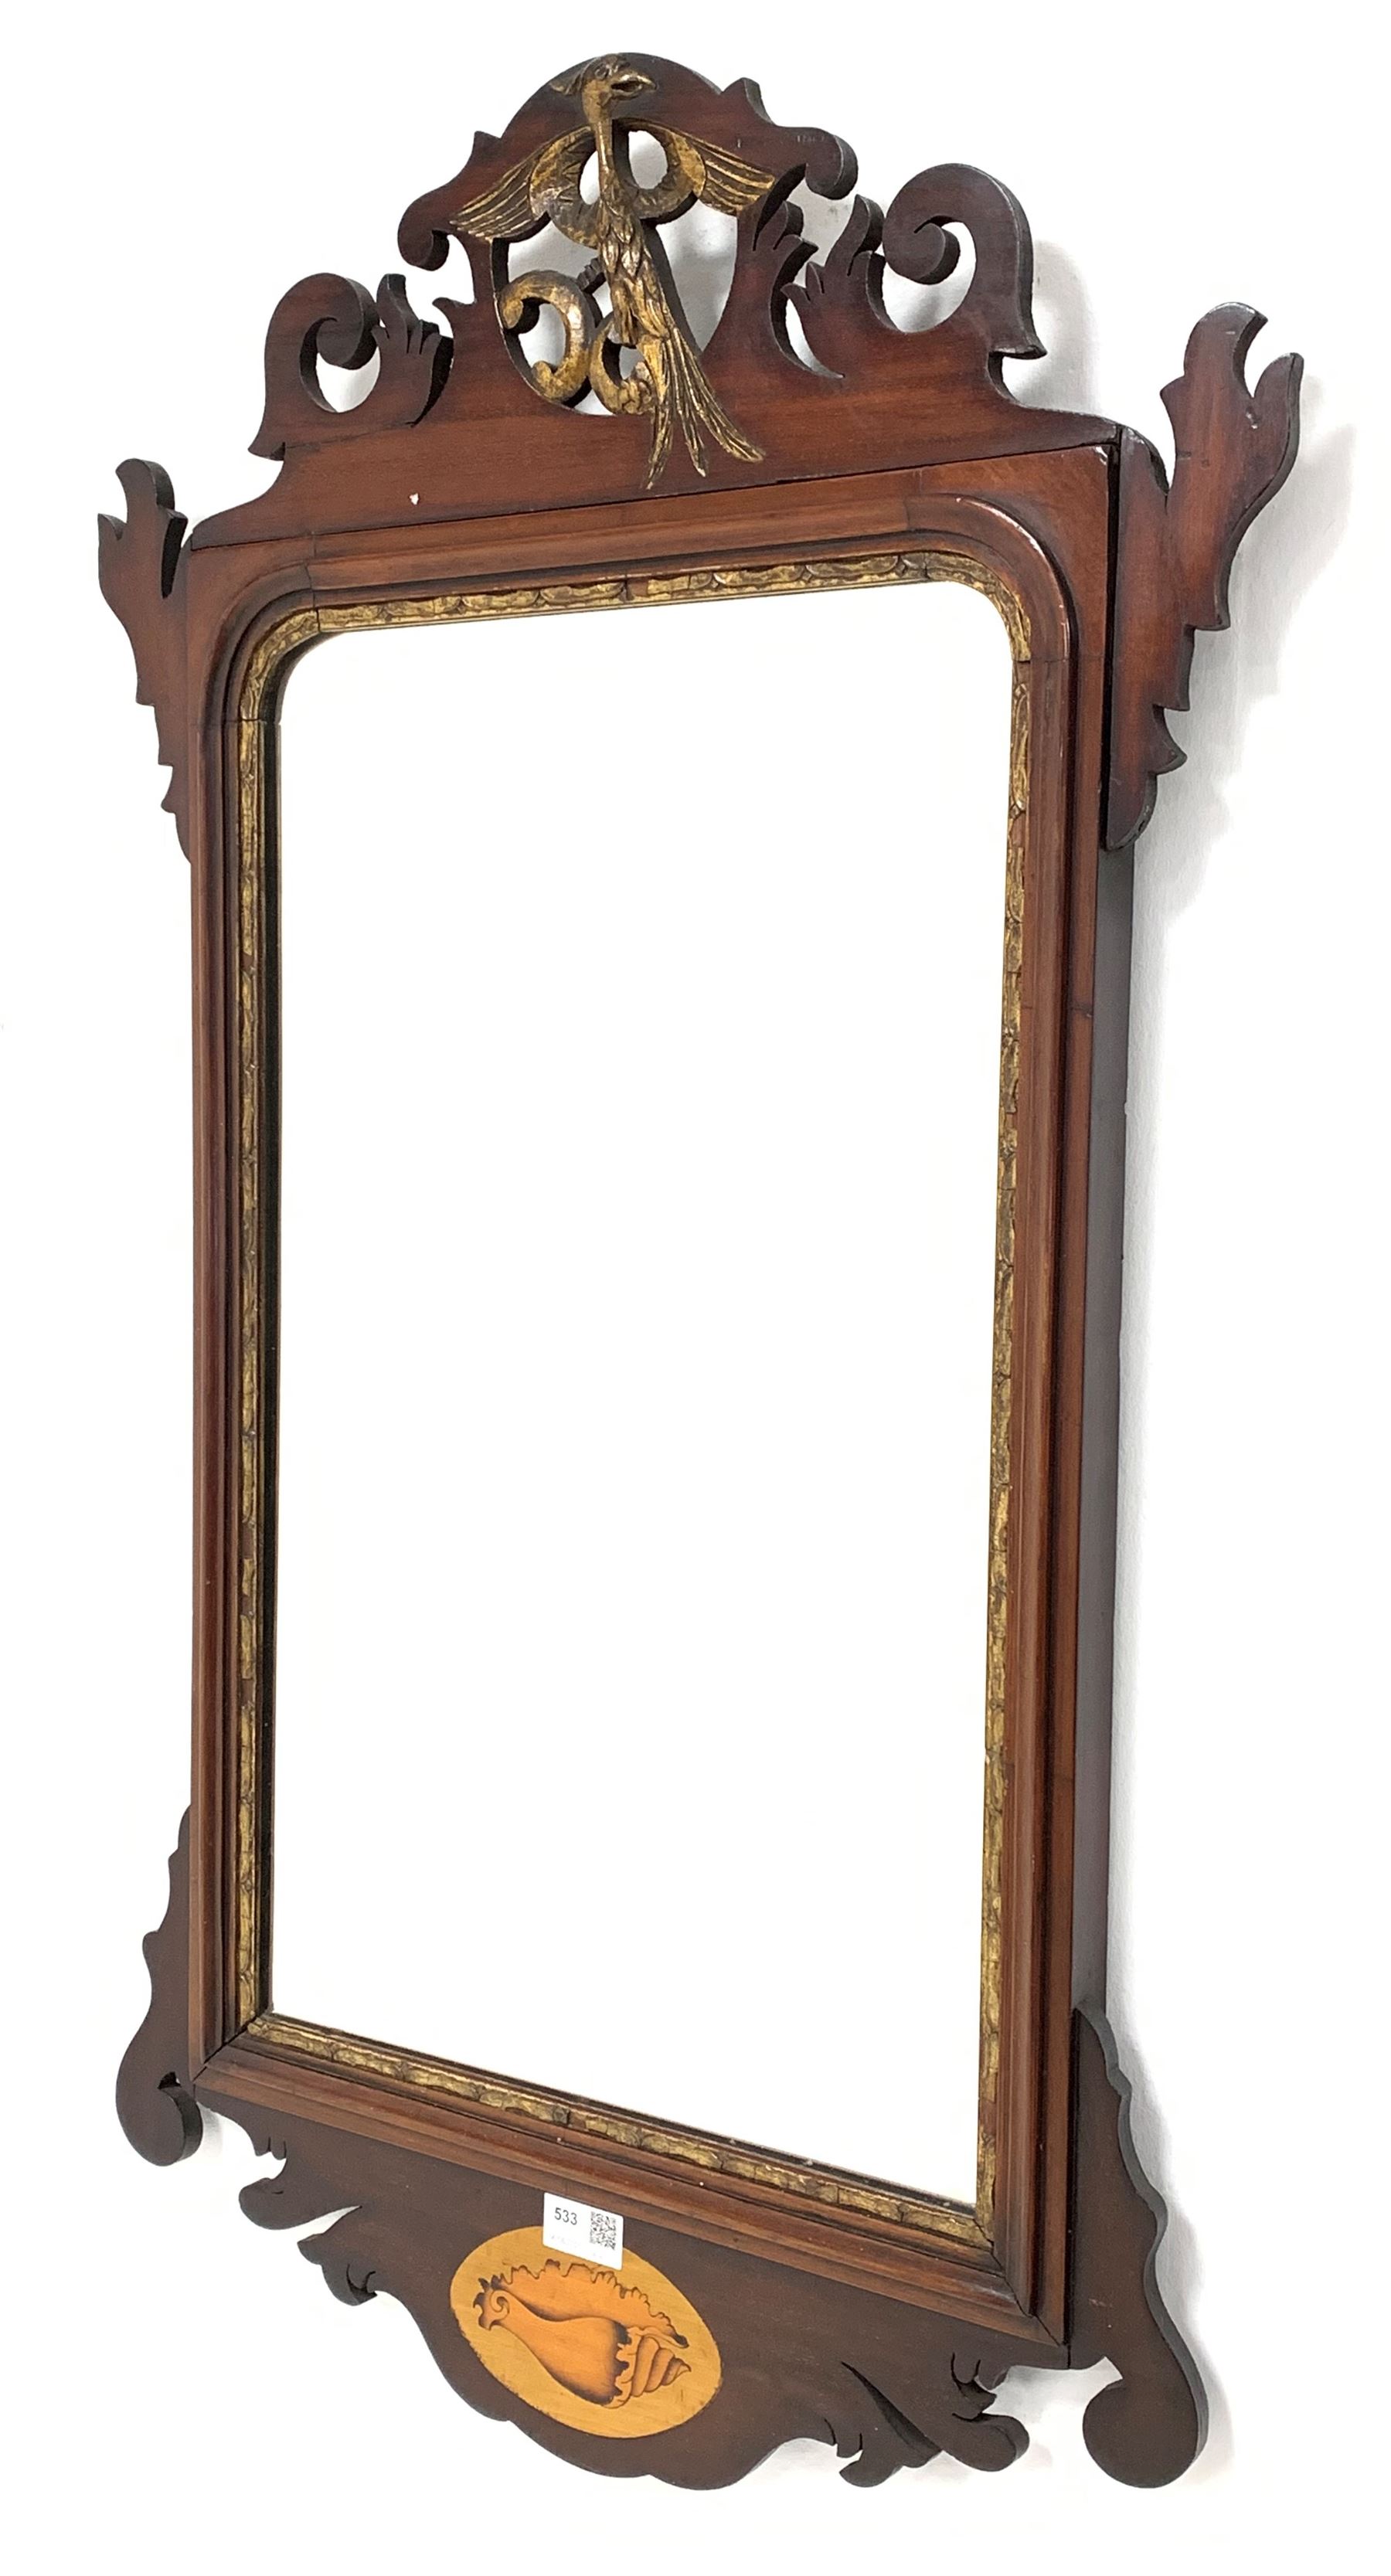 Chippendale style fret wall mirror with bevelled glass